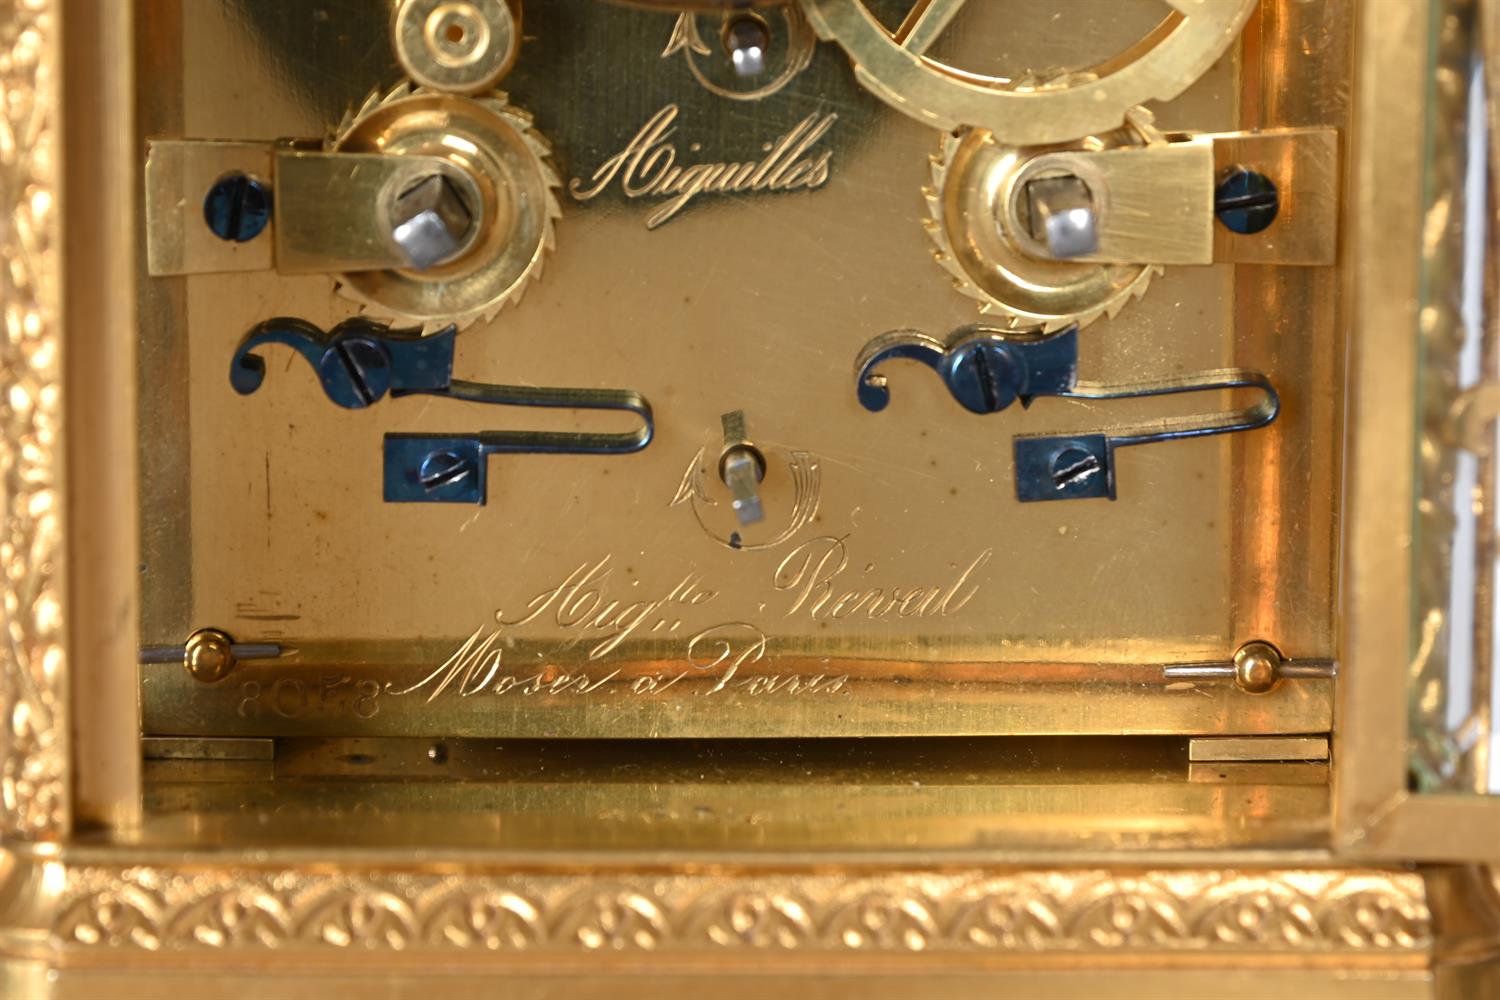 AN UNUSUAL FRENCH PORCELAIN PANEL MOUNTED GILT BRASS ALARM CARRIAGE CLOCK IN A ONE-PIECE CASE - Image 7 of 8